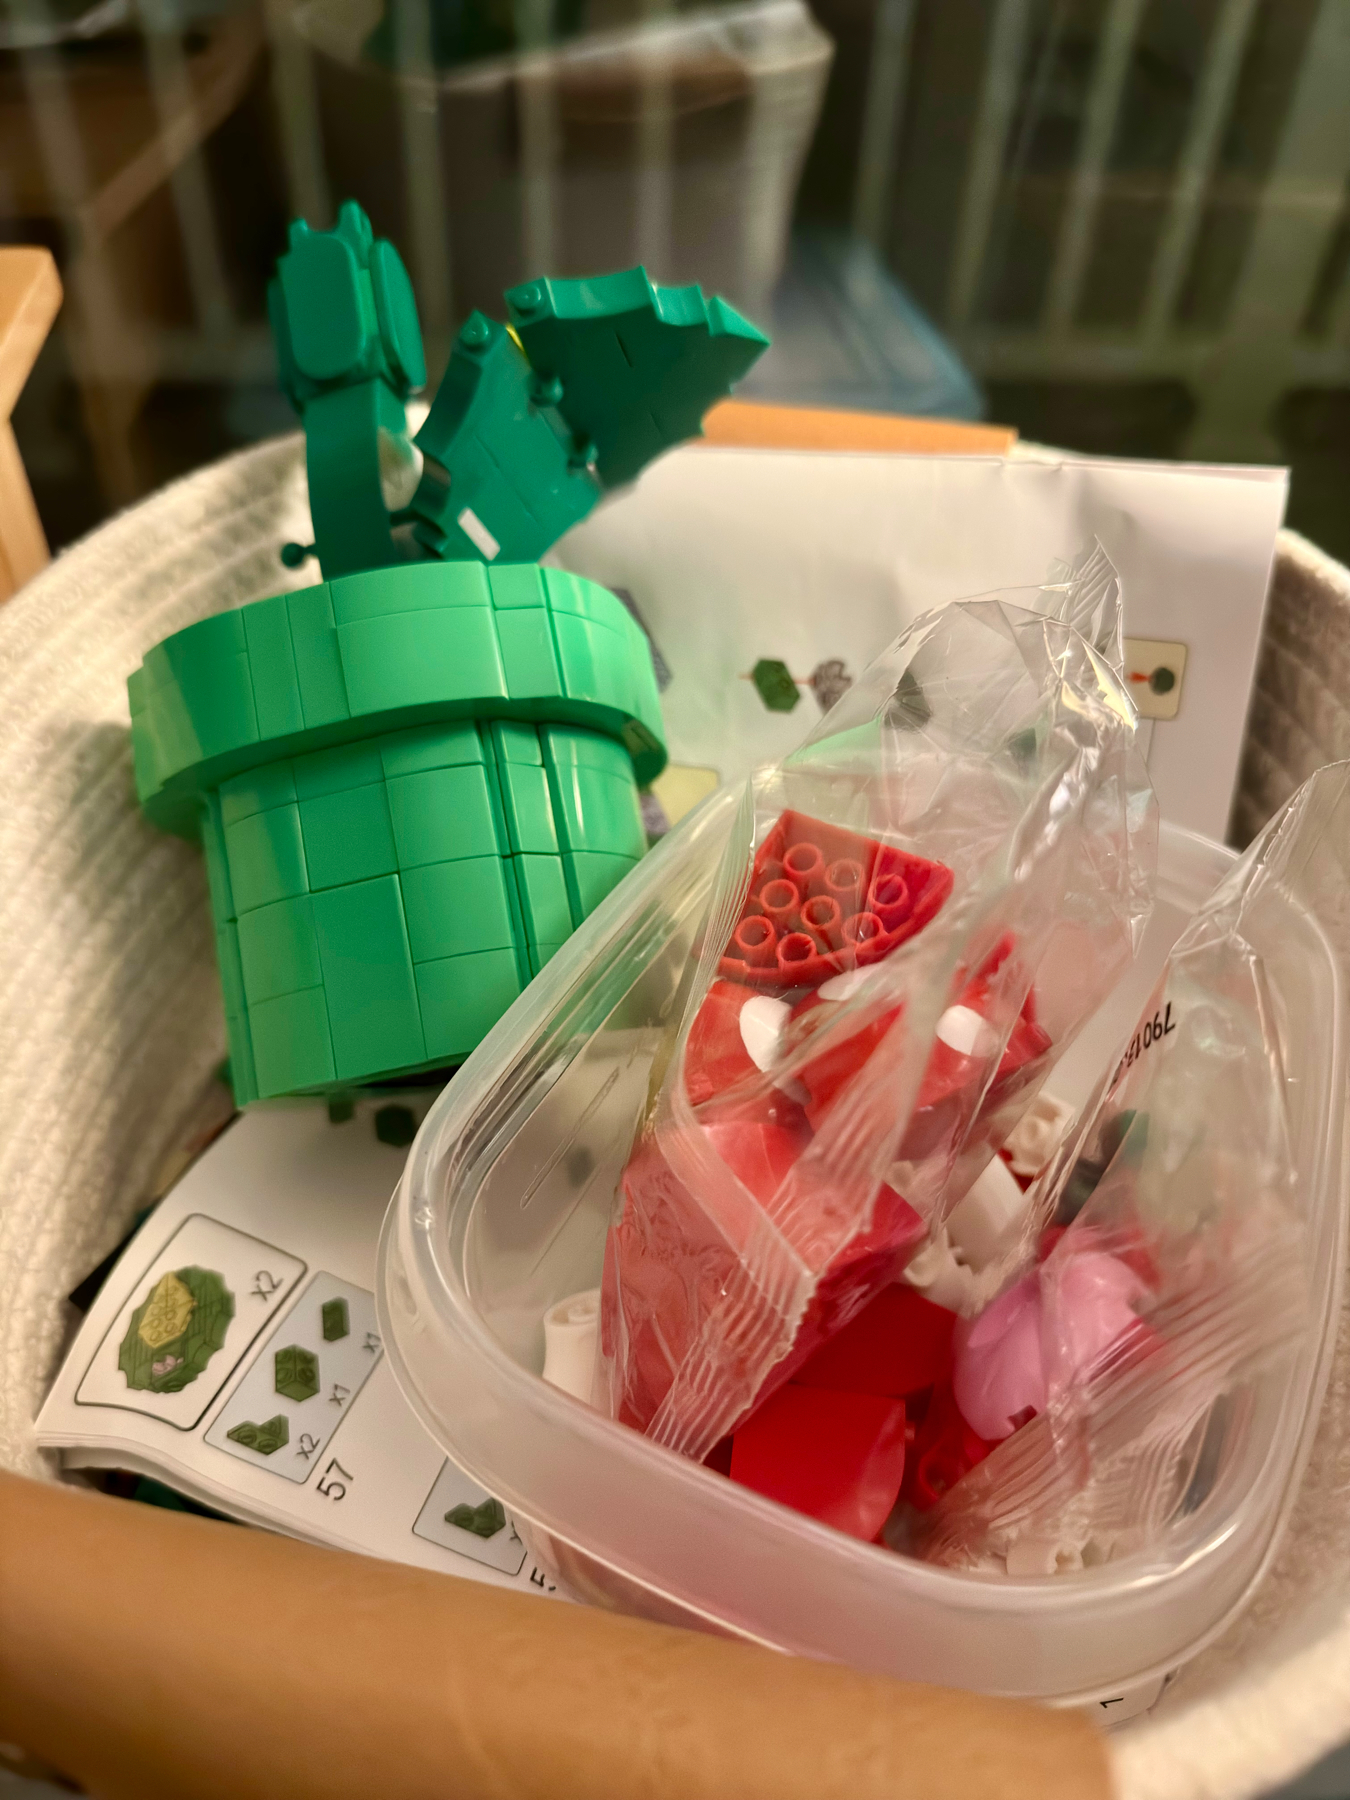 A partially completed LEGO flower bouquet, with a green brick-built vase and some flower stems, alongside sealed bags of LEGO pieces and an instruction manual.